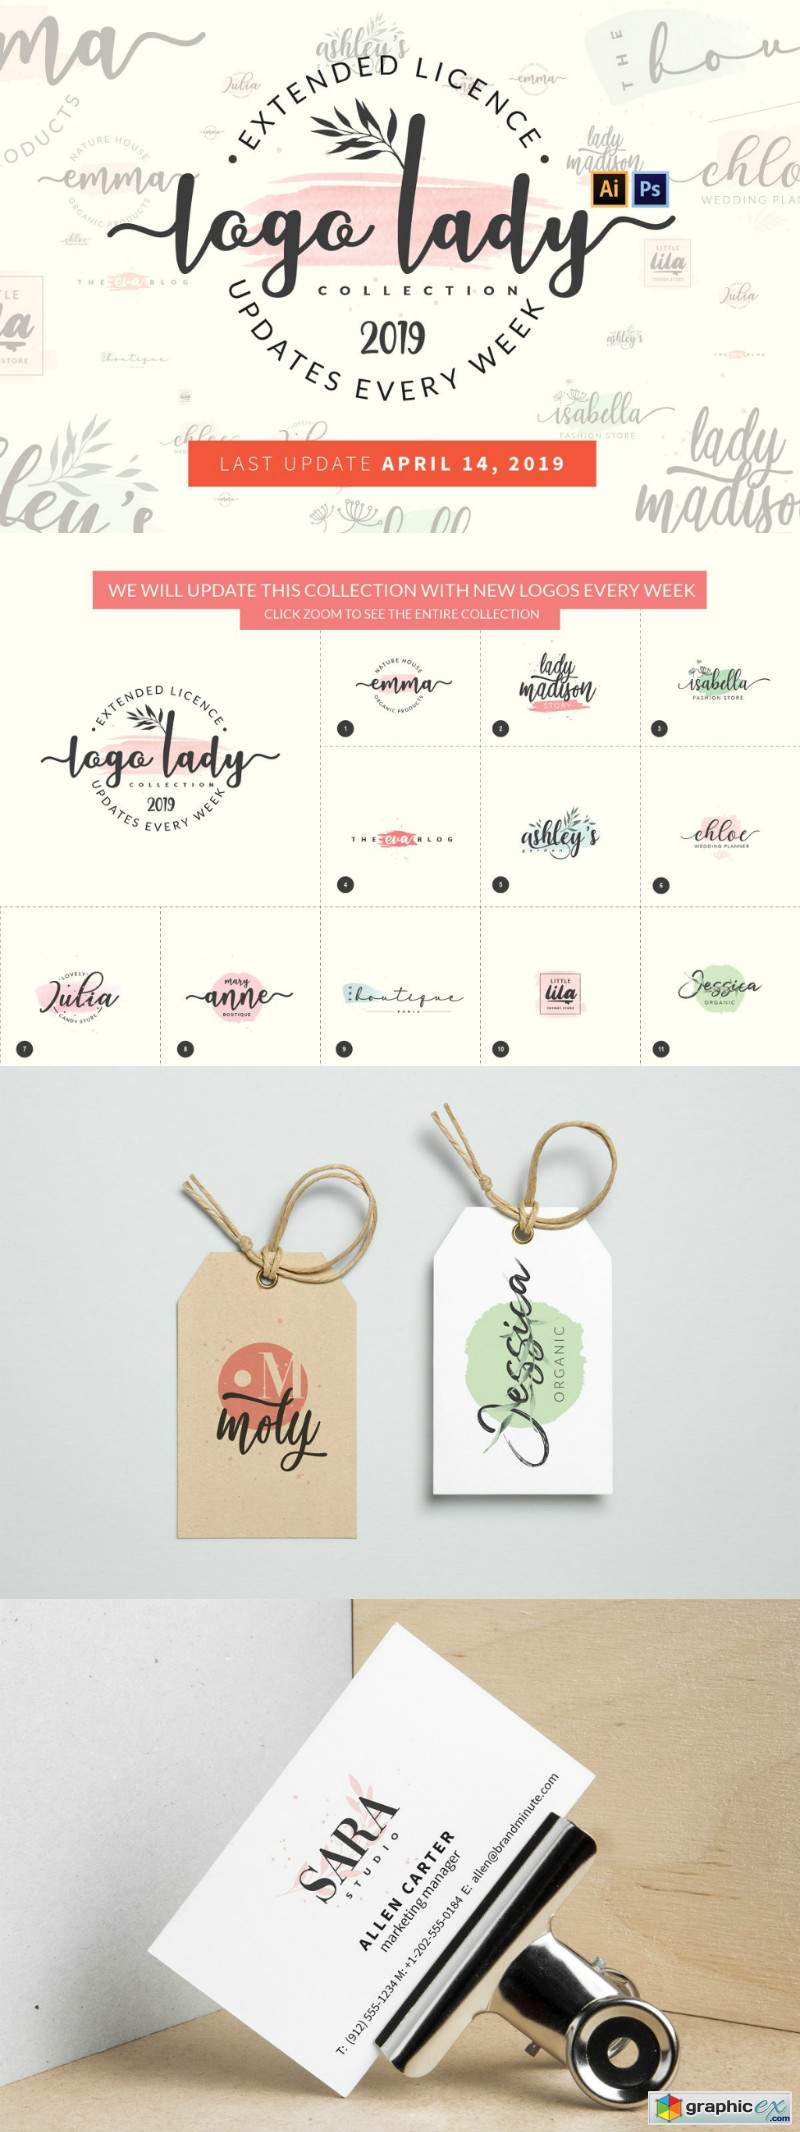 Logo Lady Collection - Starter Pack